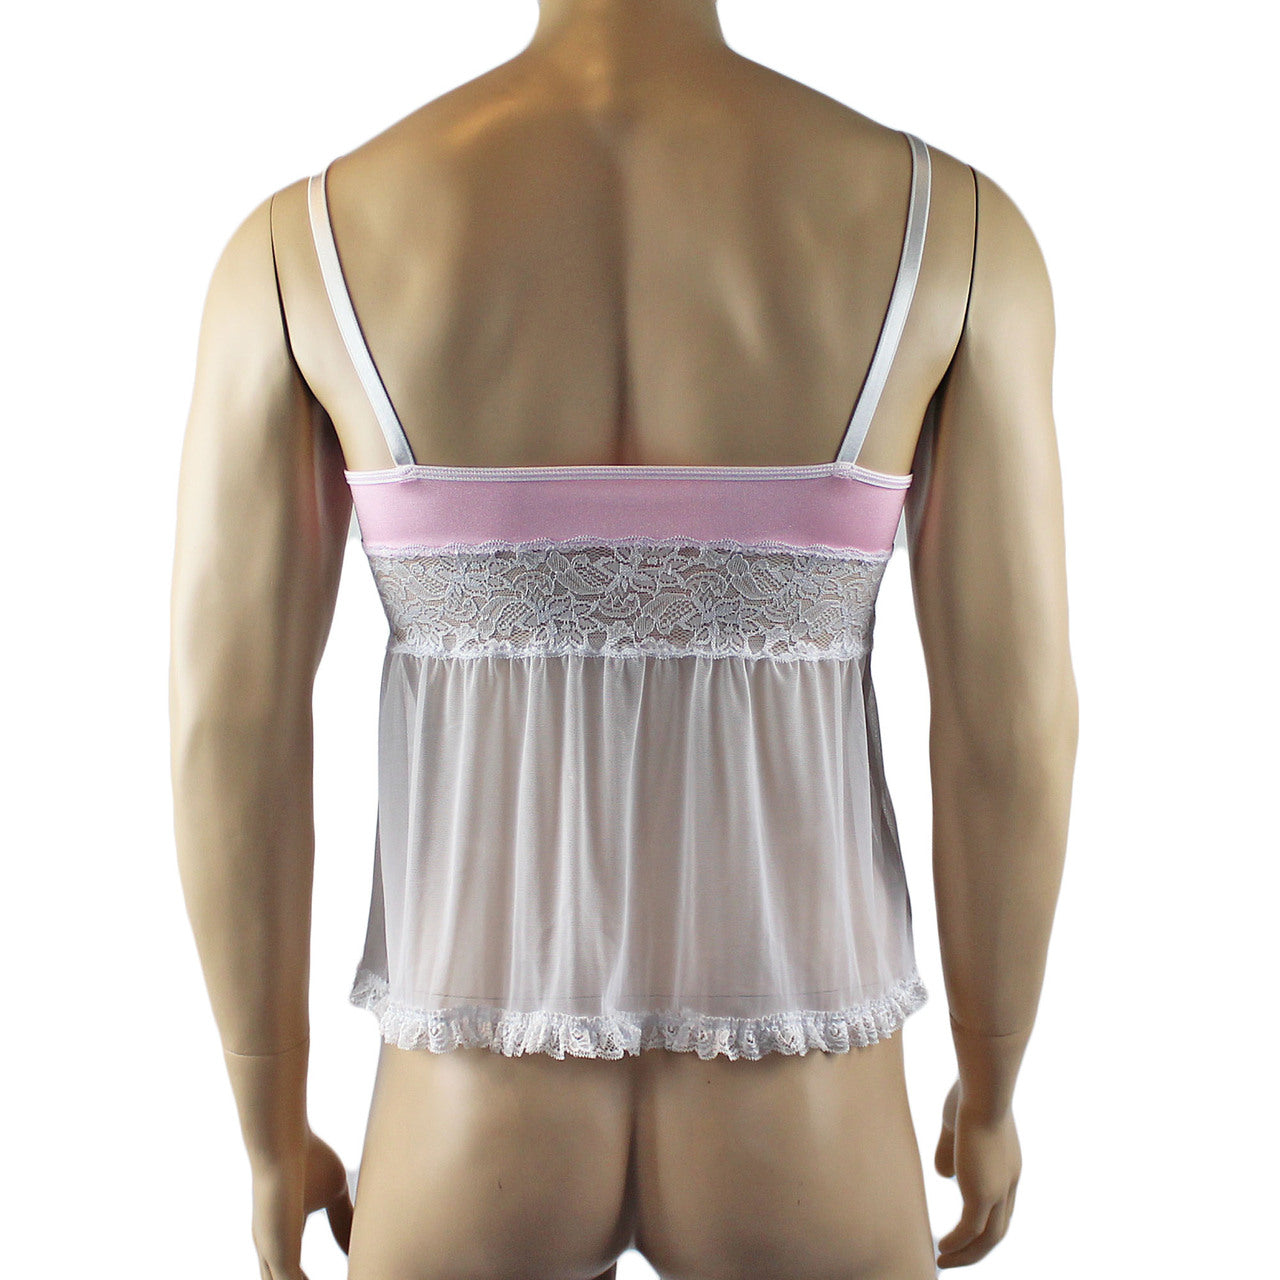 Mens Joanne Mini Babydoll Camisole - Sizes up to 3XL Light Pink & White